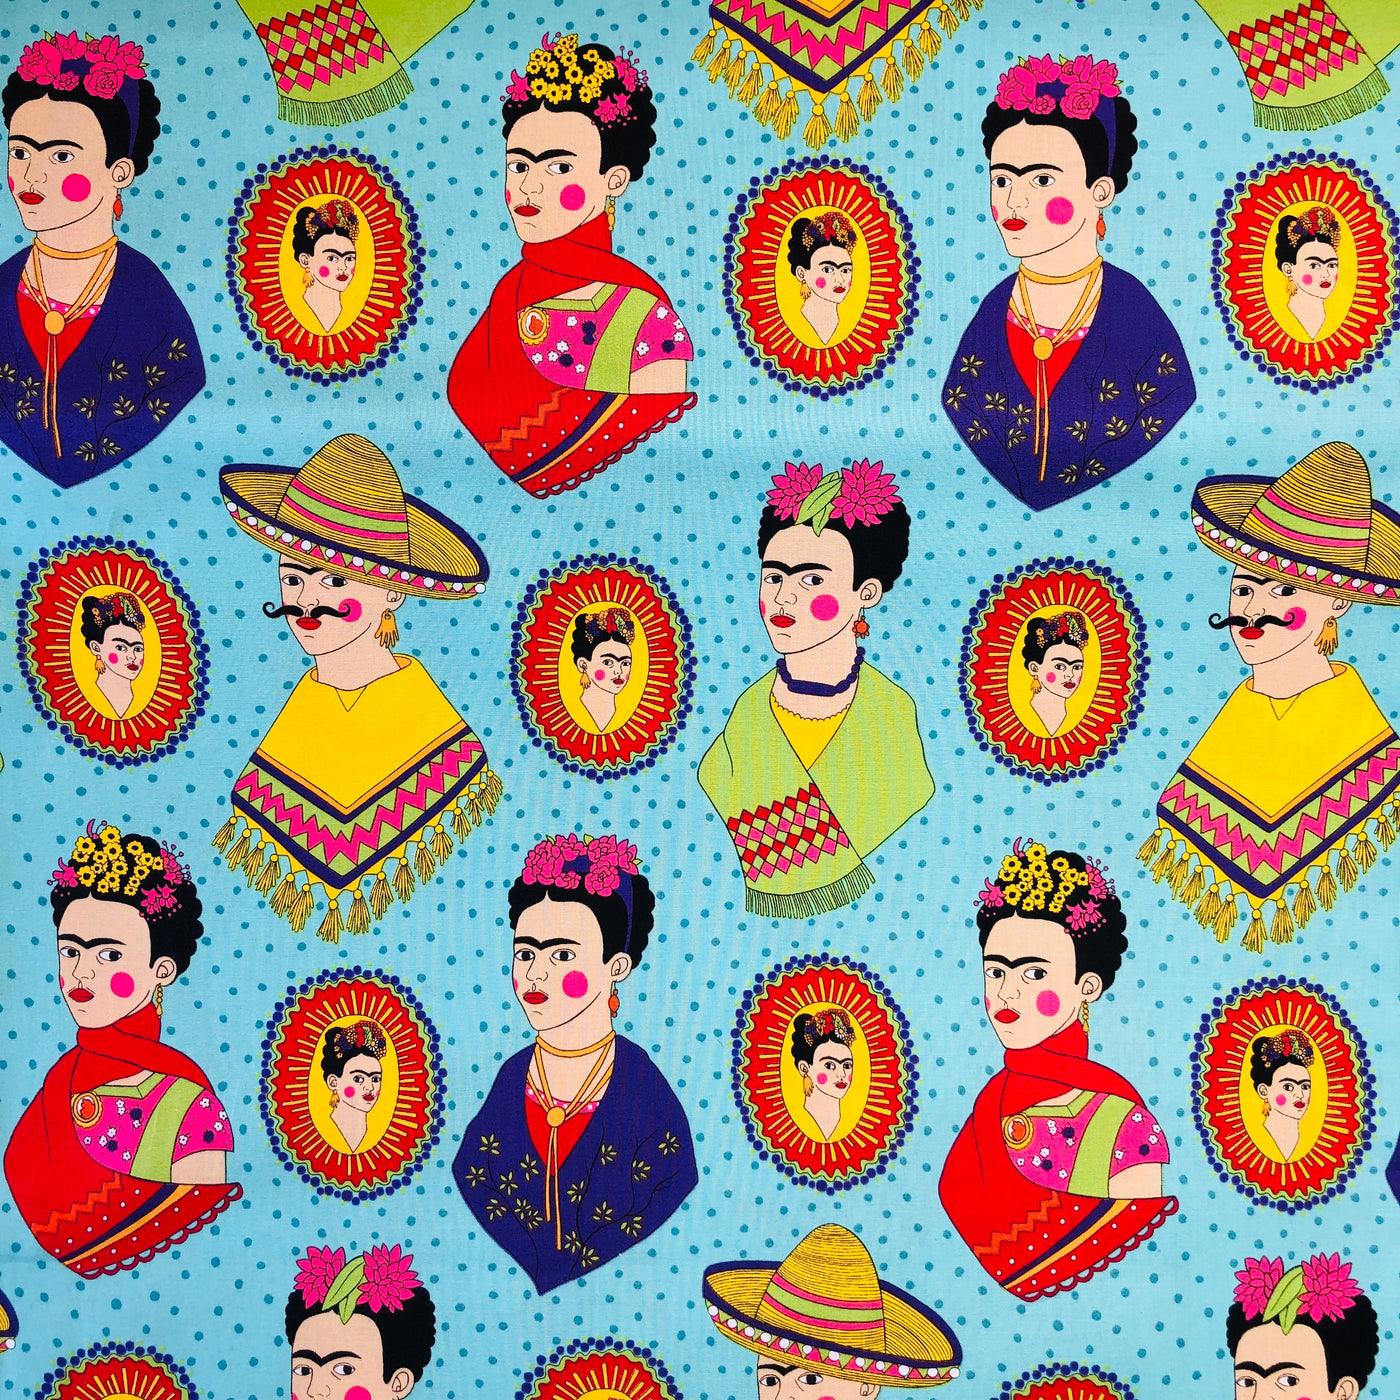 Alexander Henry Fabrics in Fantastico Frida pattern. This pattern has multiple Frida's  dressed up in different costumes against a teal background